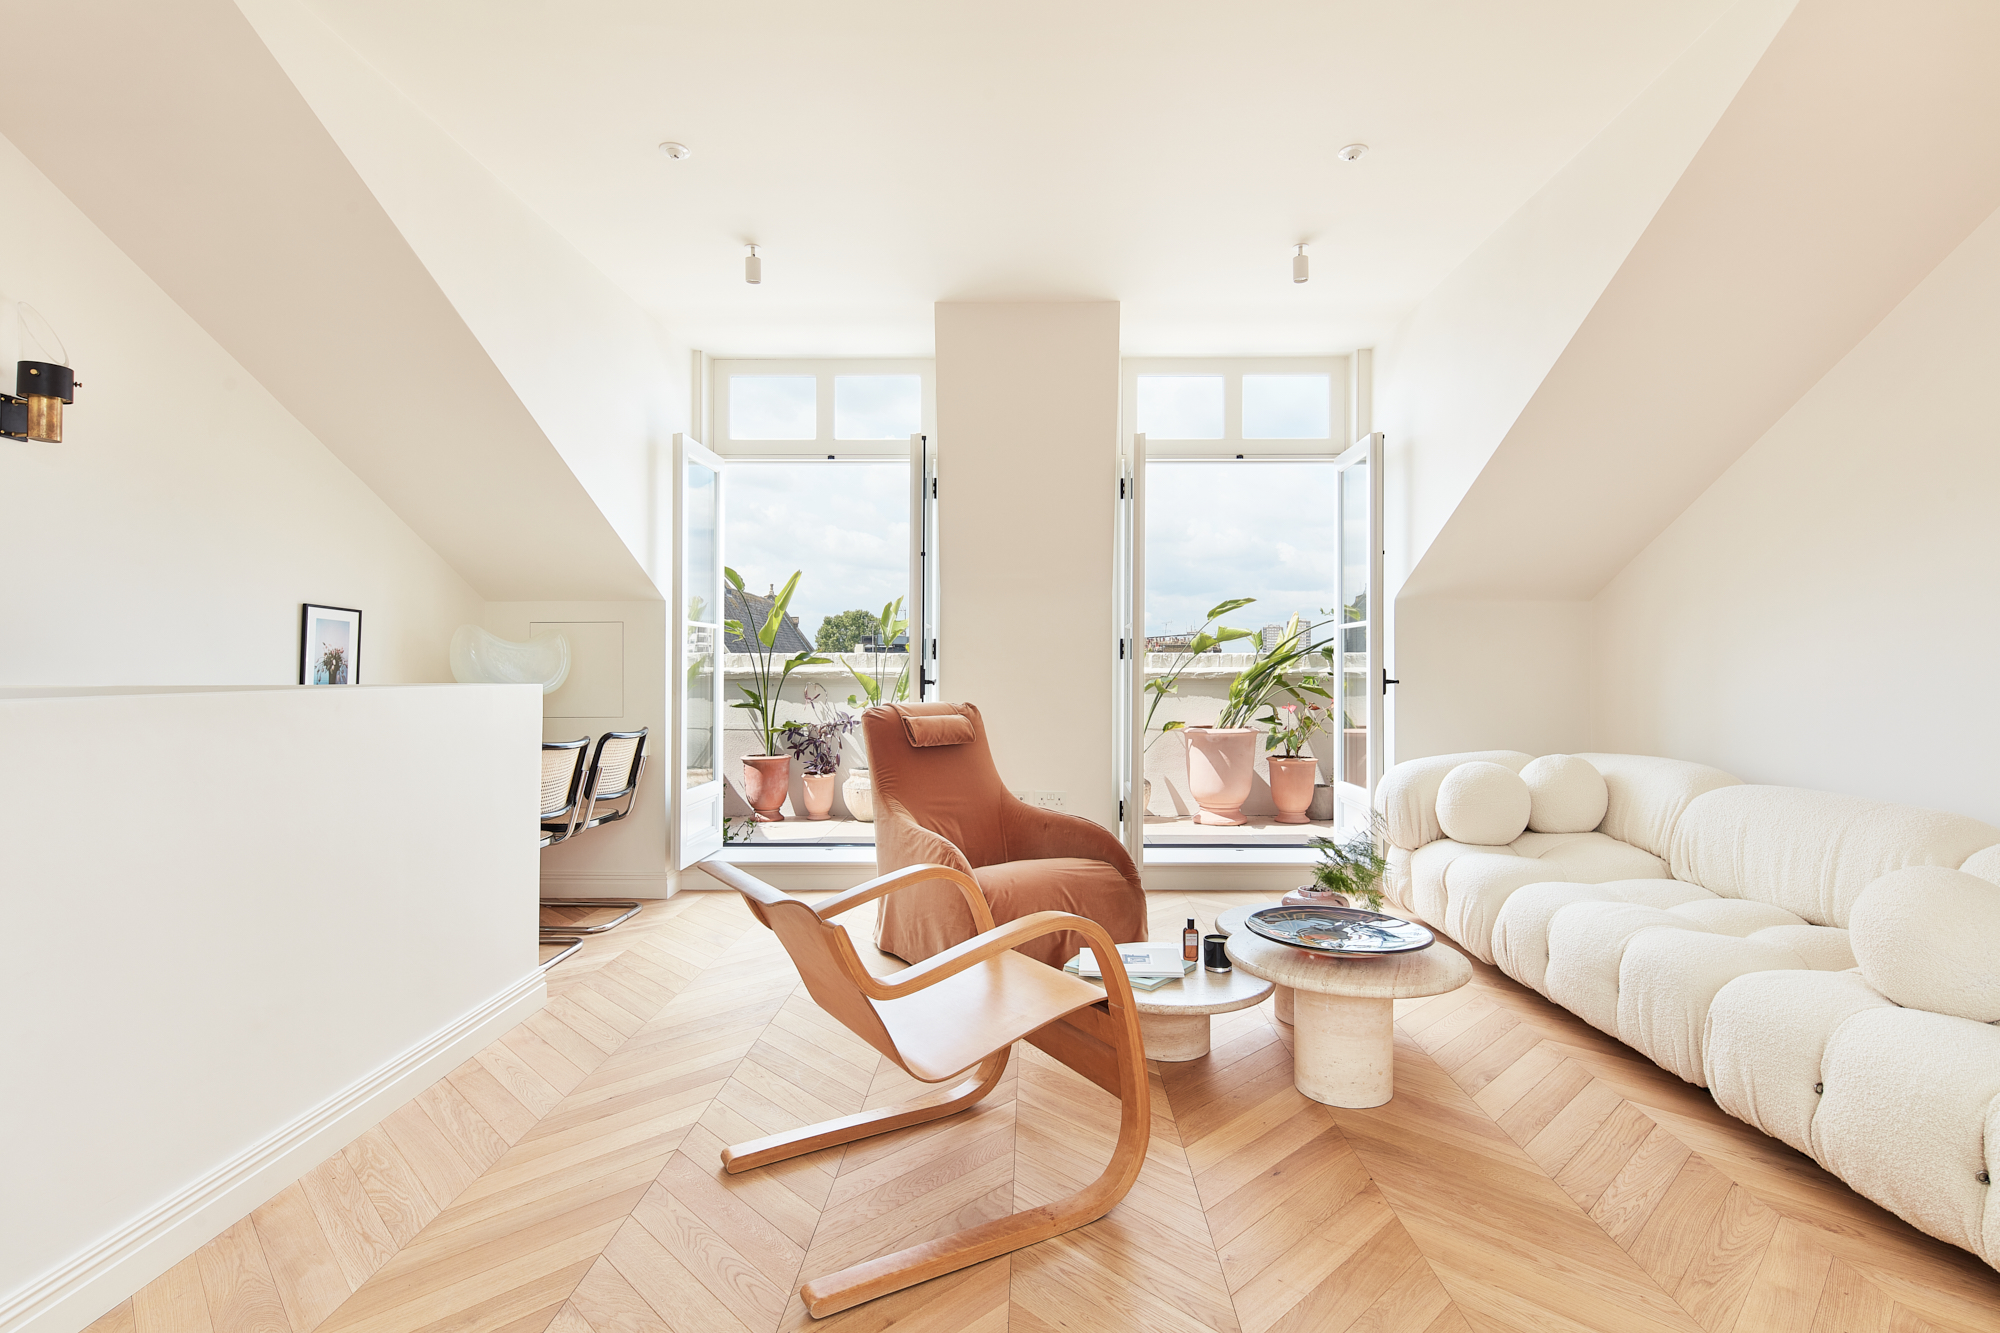 Luxurious bright living room of a duplex apartment for sale on Portobello Road